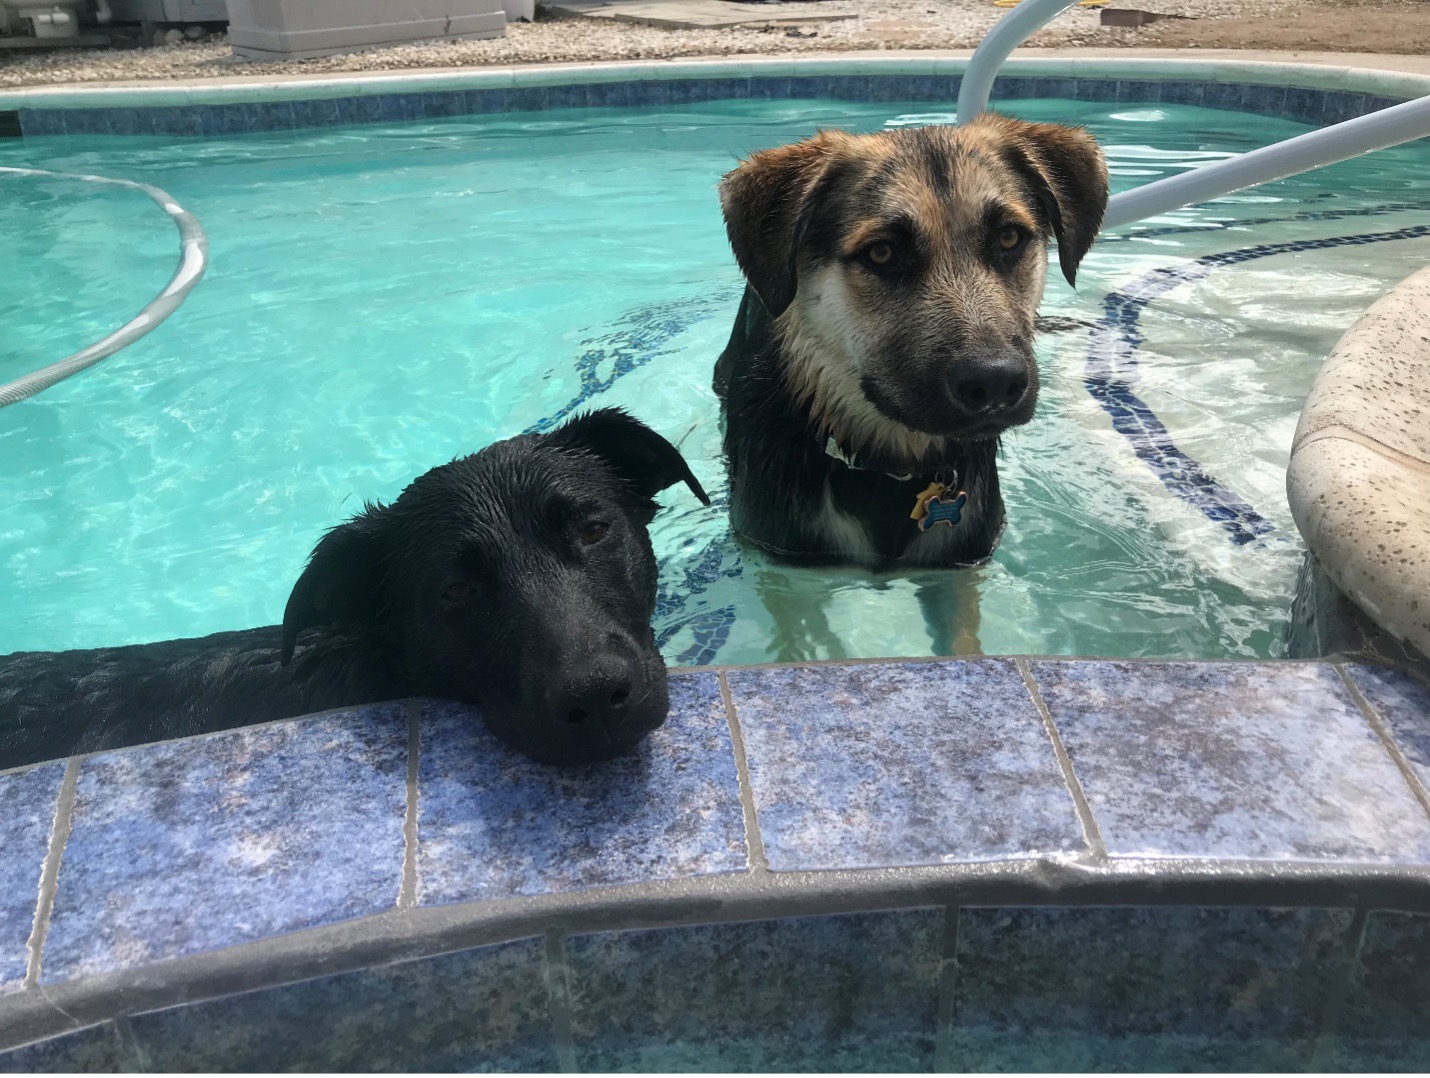 Two lab/shepherd mix dogs pictured in a swimming pool